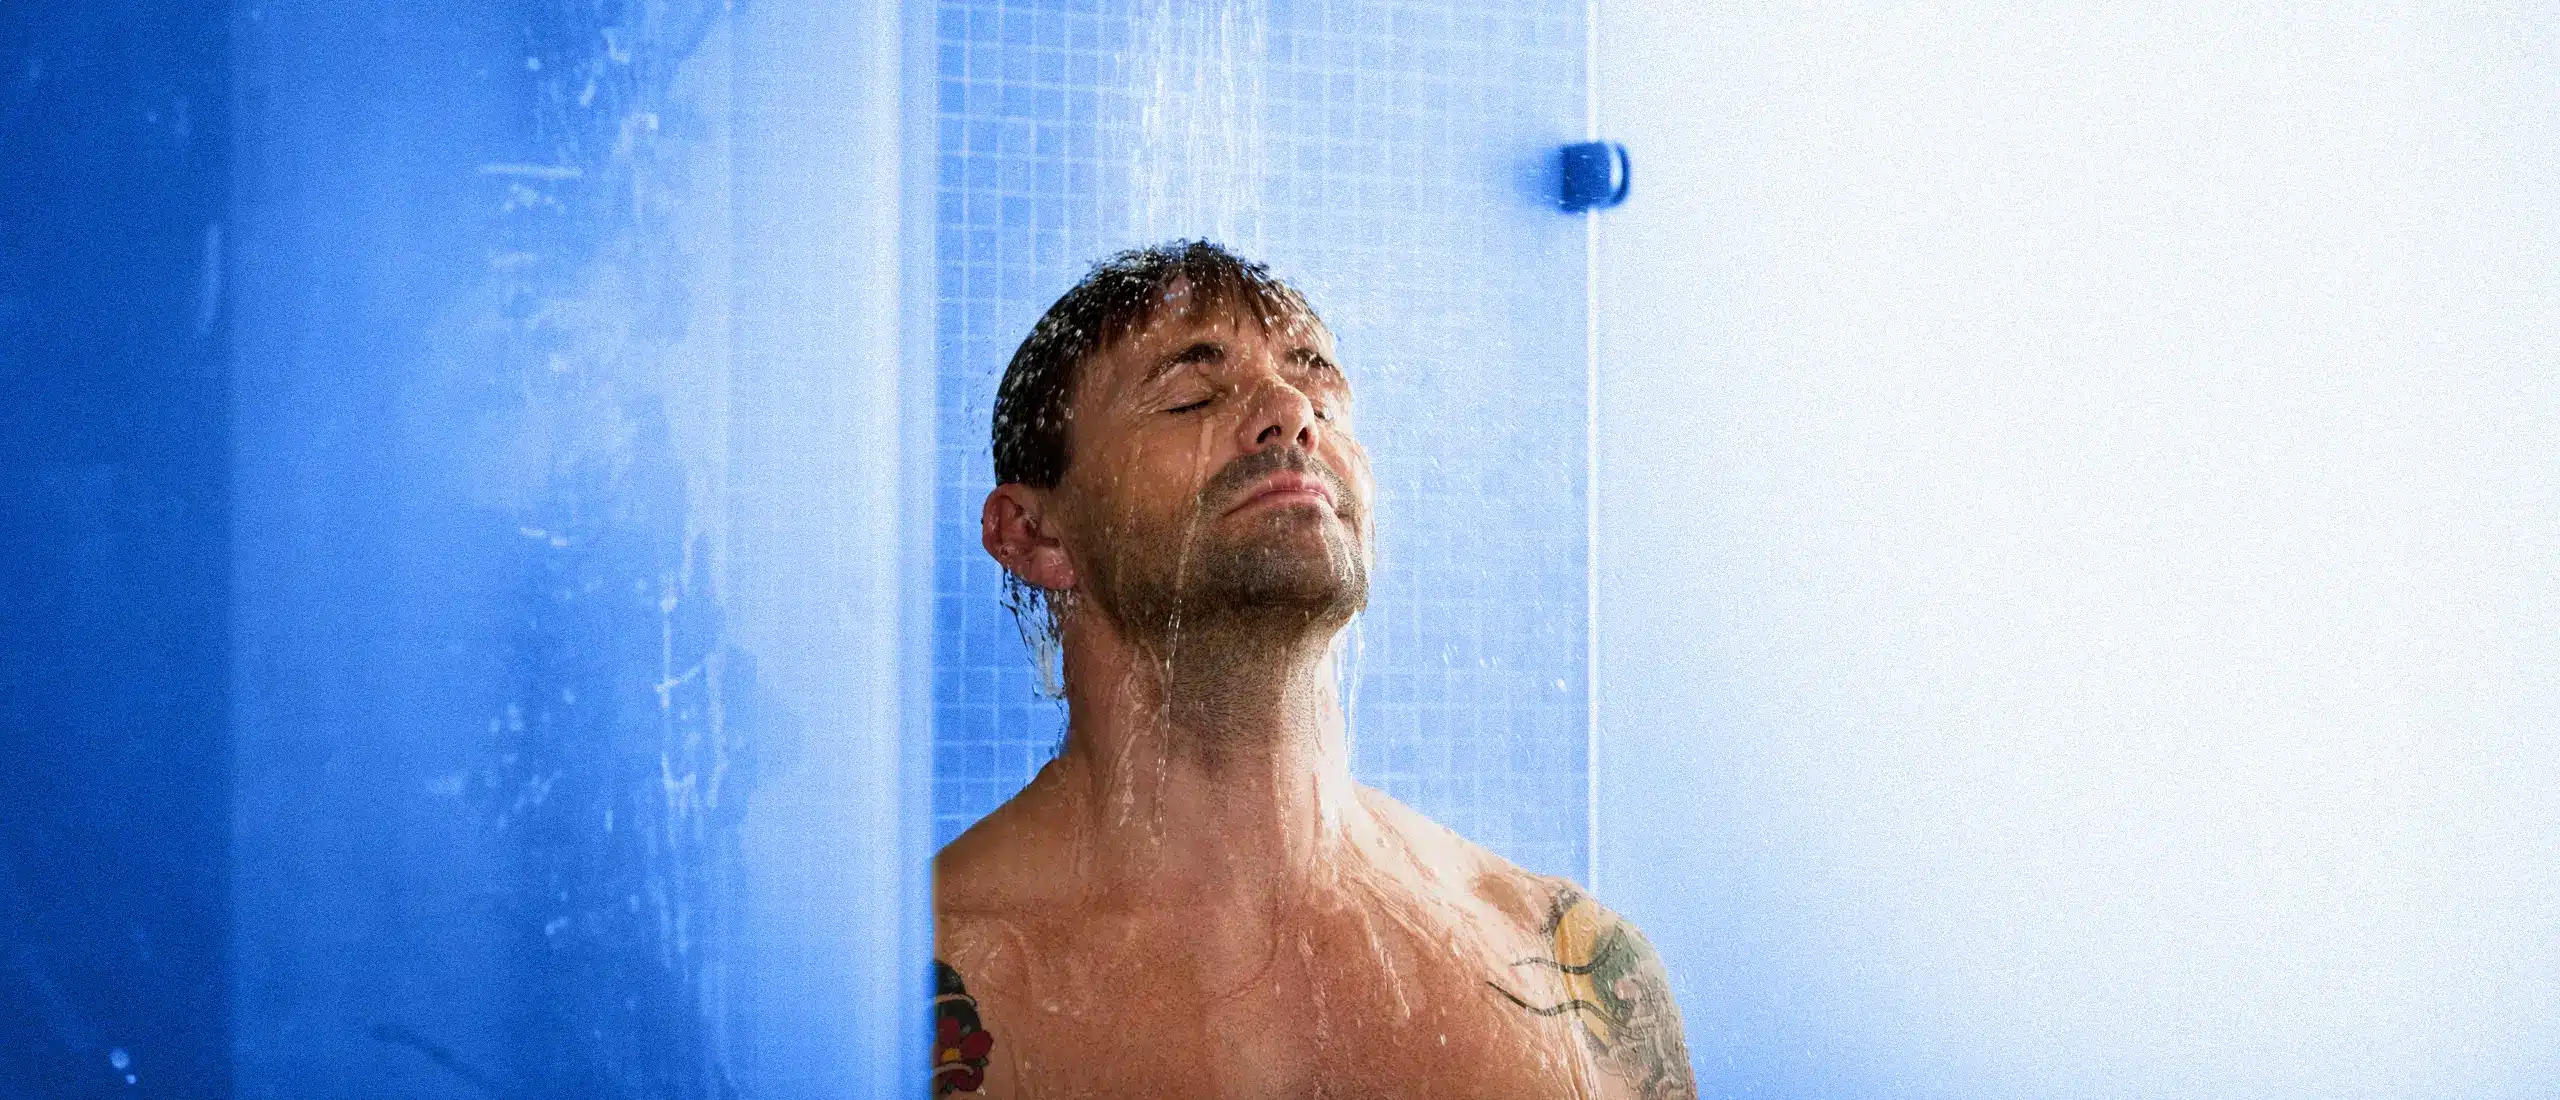 Man looking way to relaxed in a cold shower